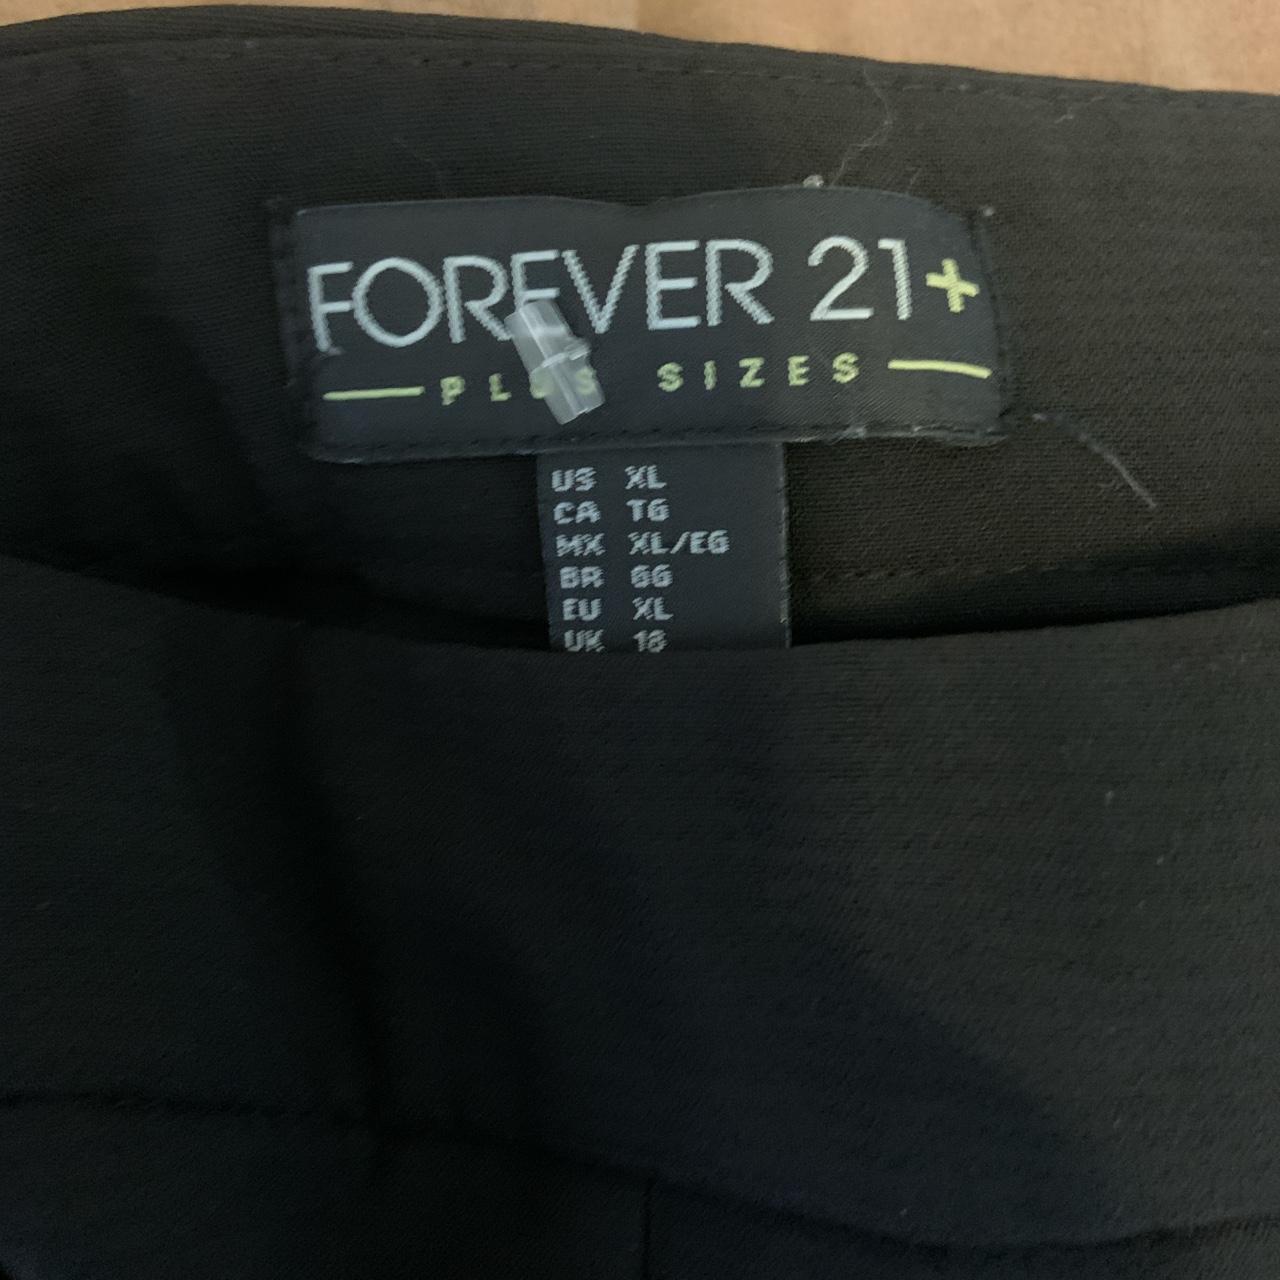 Product Image 2 - From the Forever 21 Plus